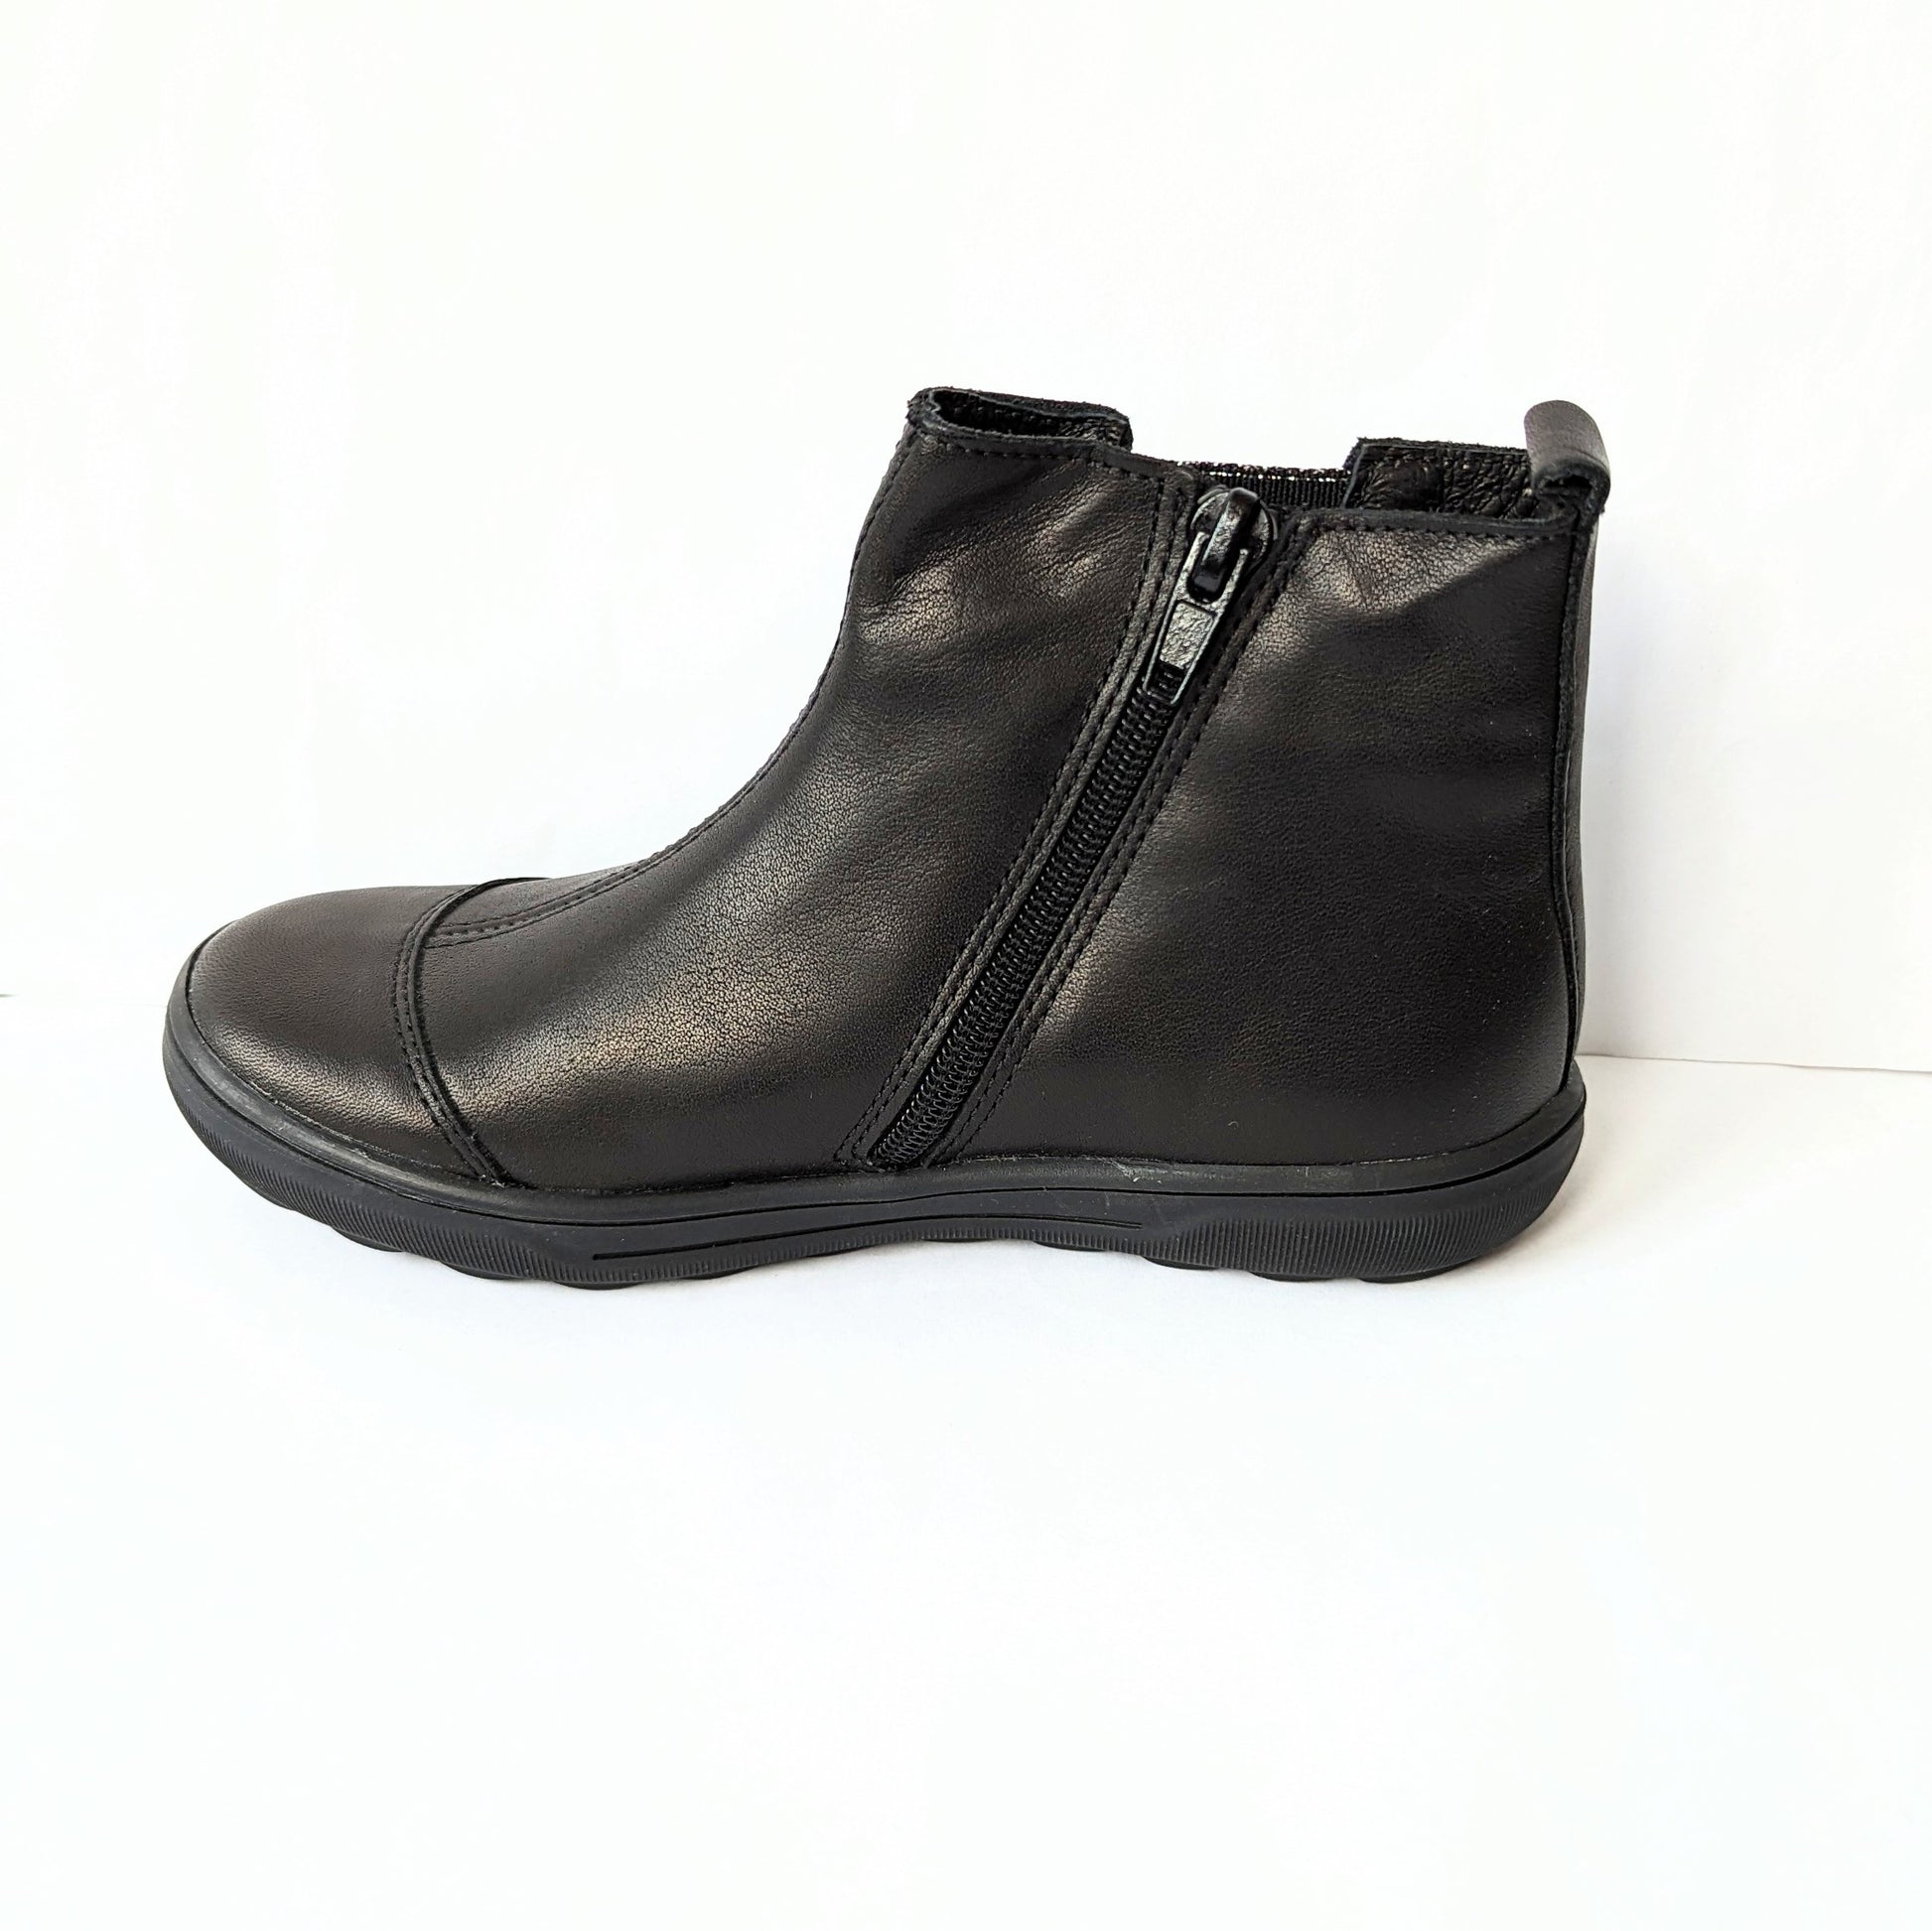 A girls ankle boot by Bopy, style Sonate, in black leather/black gold print nubuck with elastic gusset and zip fastening.   Left side view.